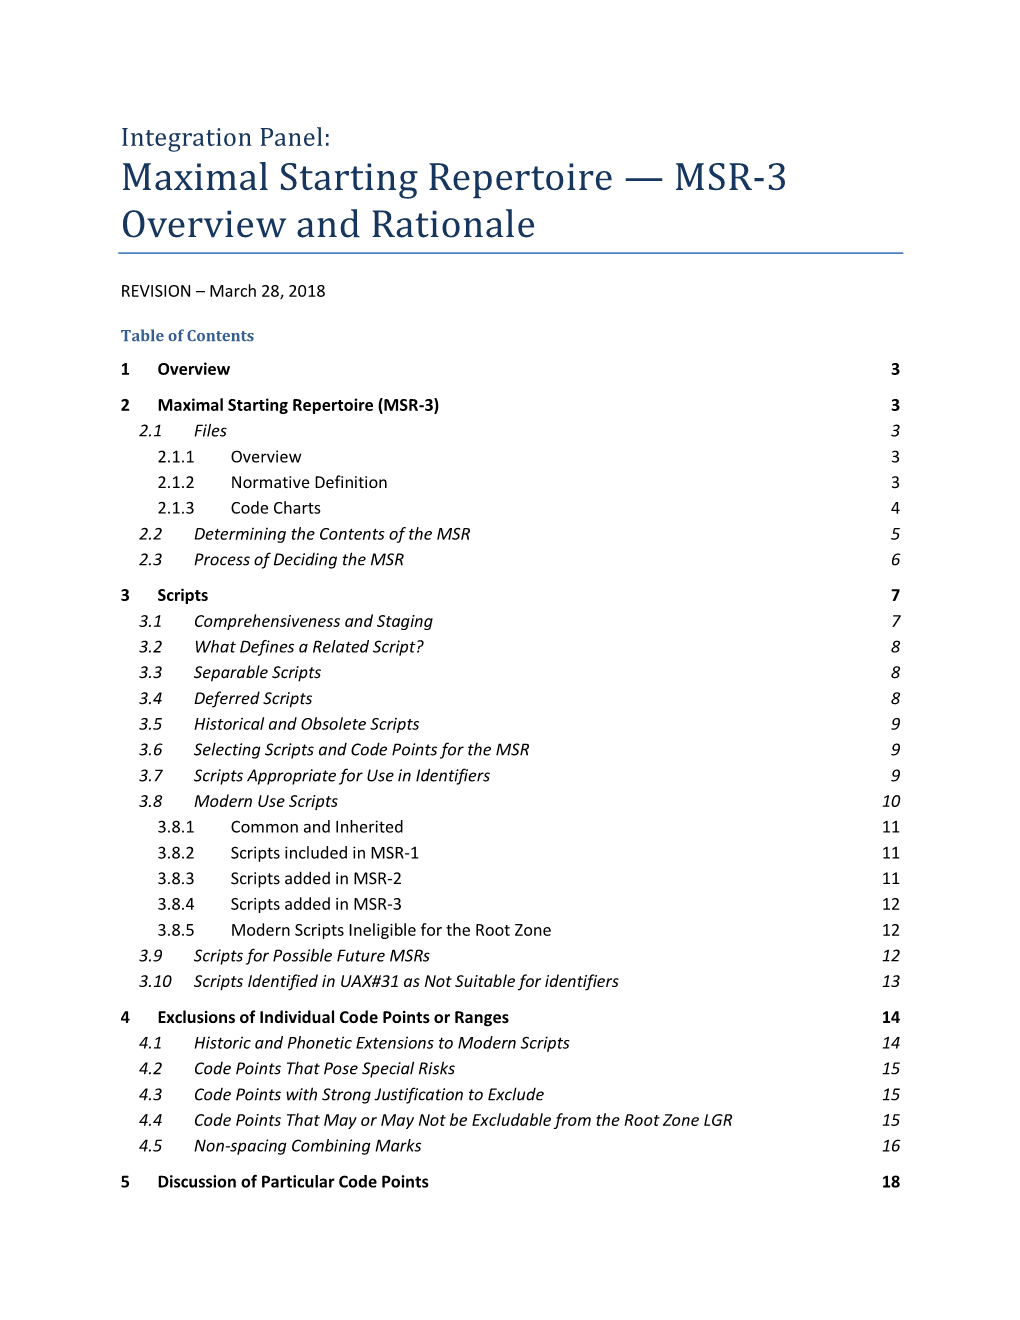 Maximal Starting Repertoire — MSR-3 Overview and Rationale